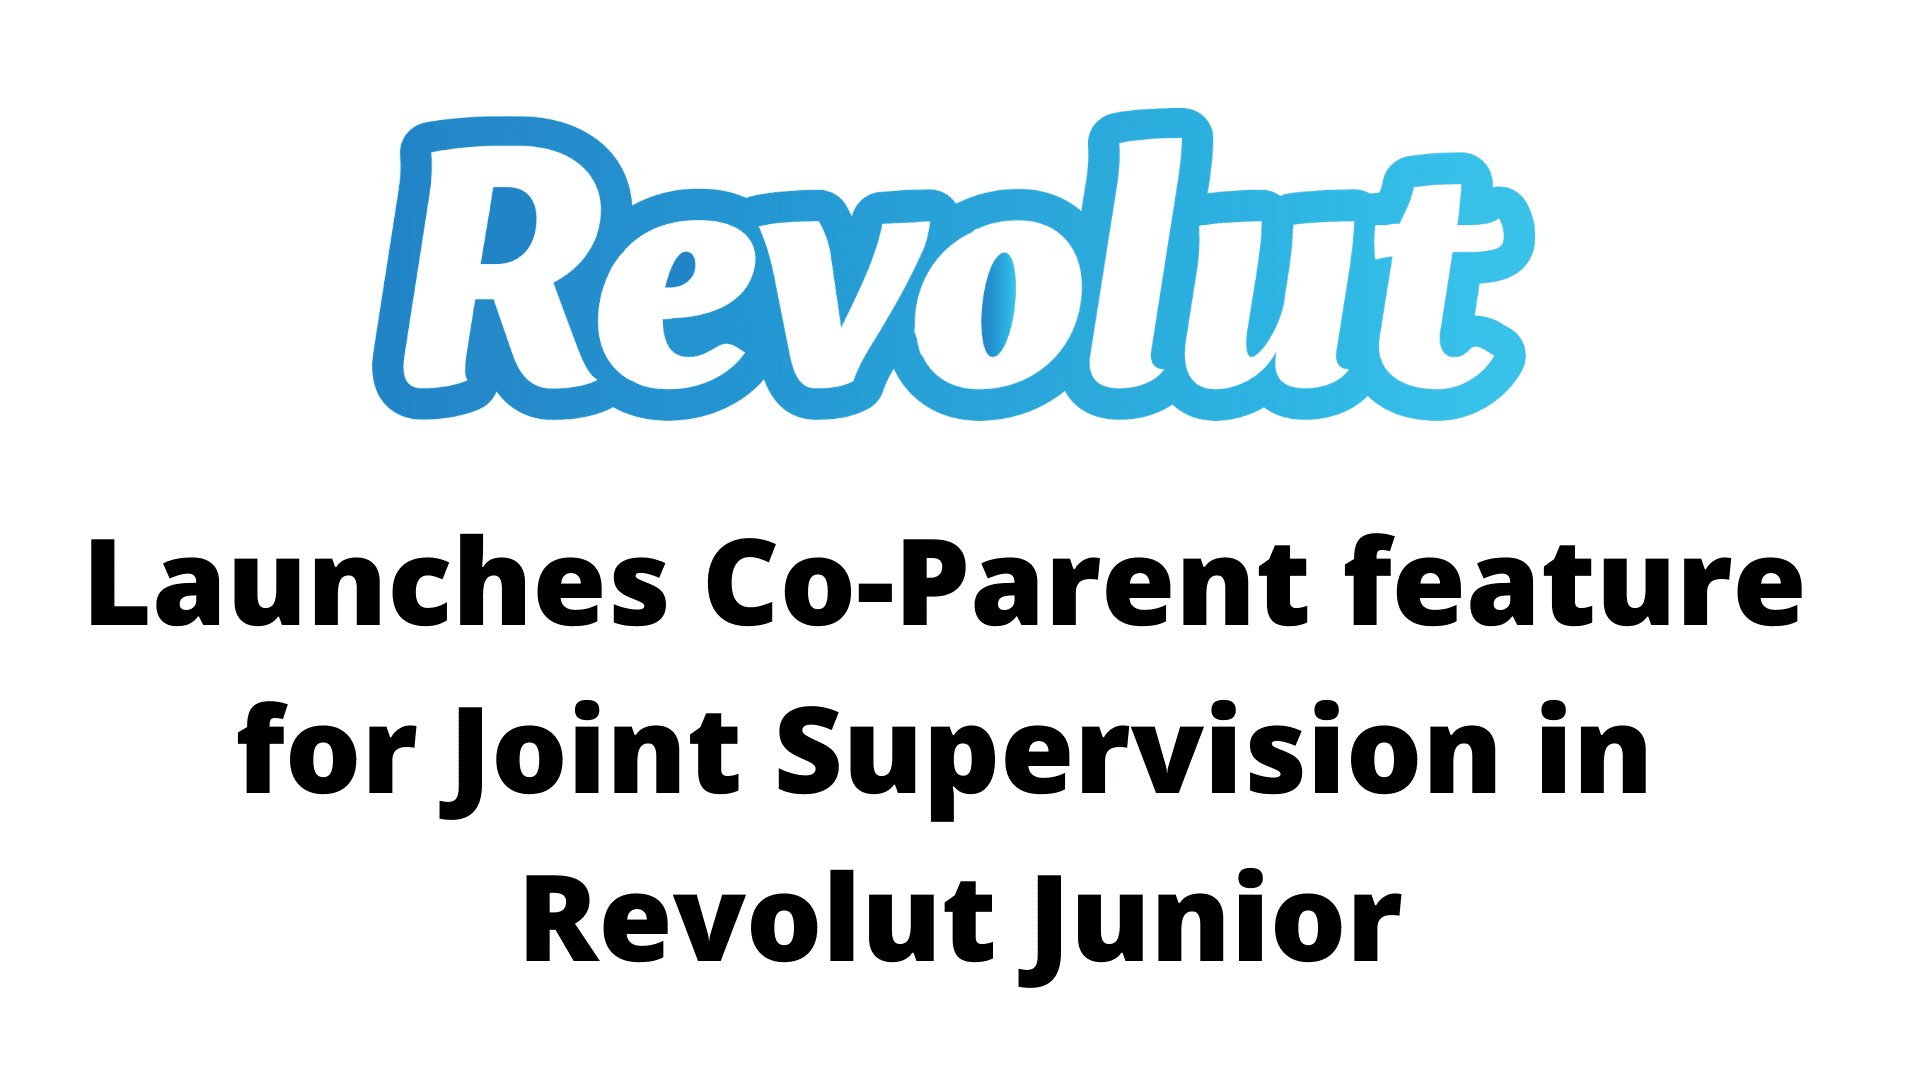 Revolut launches Co-Parent feature for joint supervision in Revolut Junior